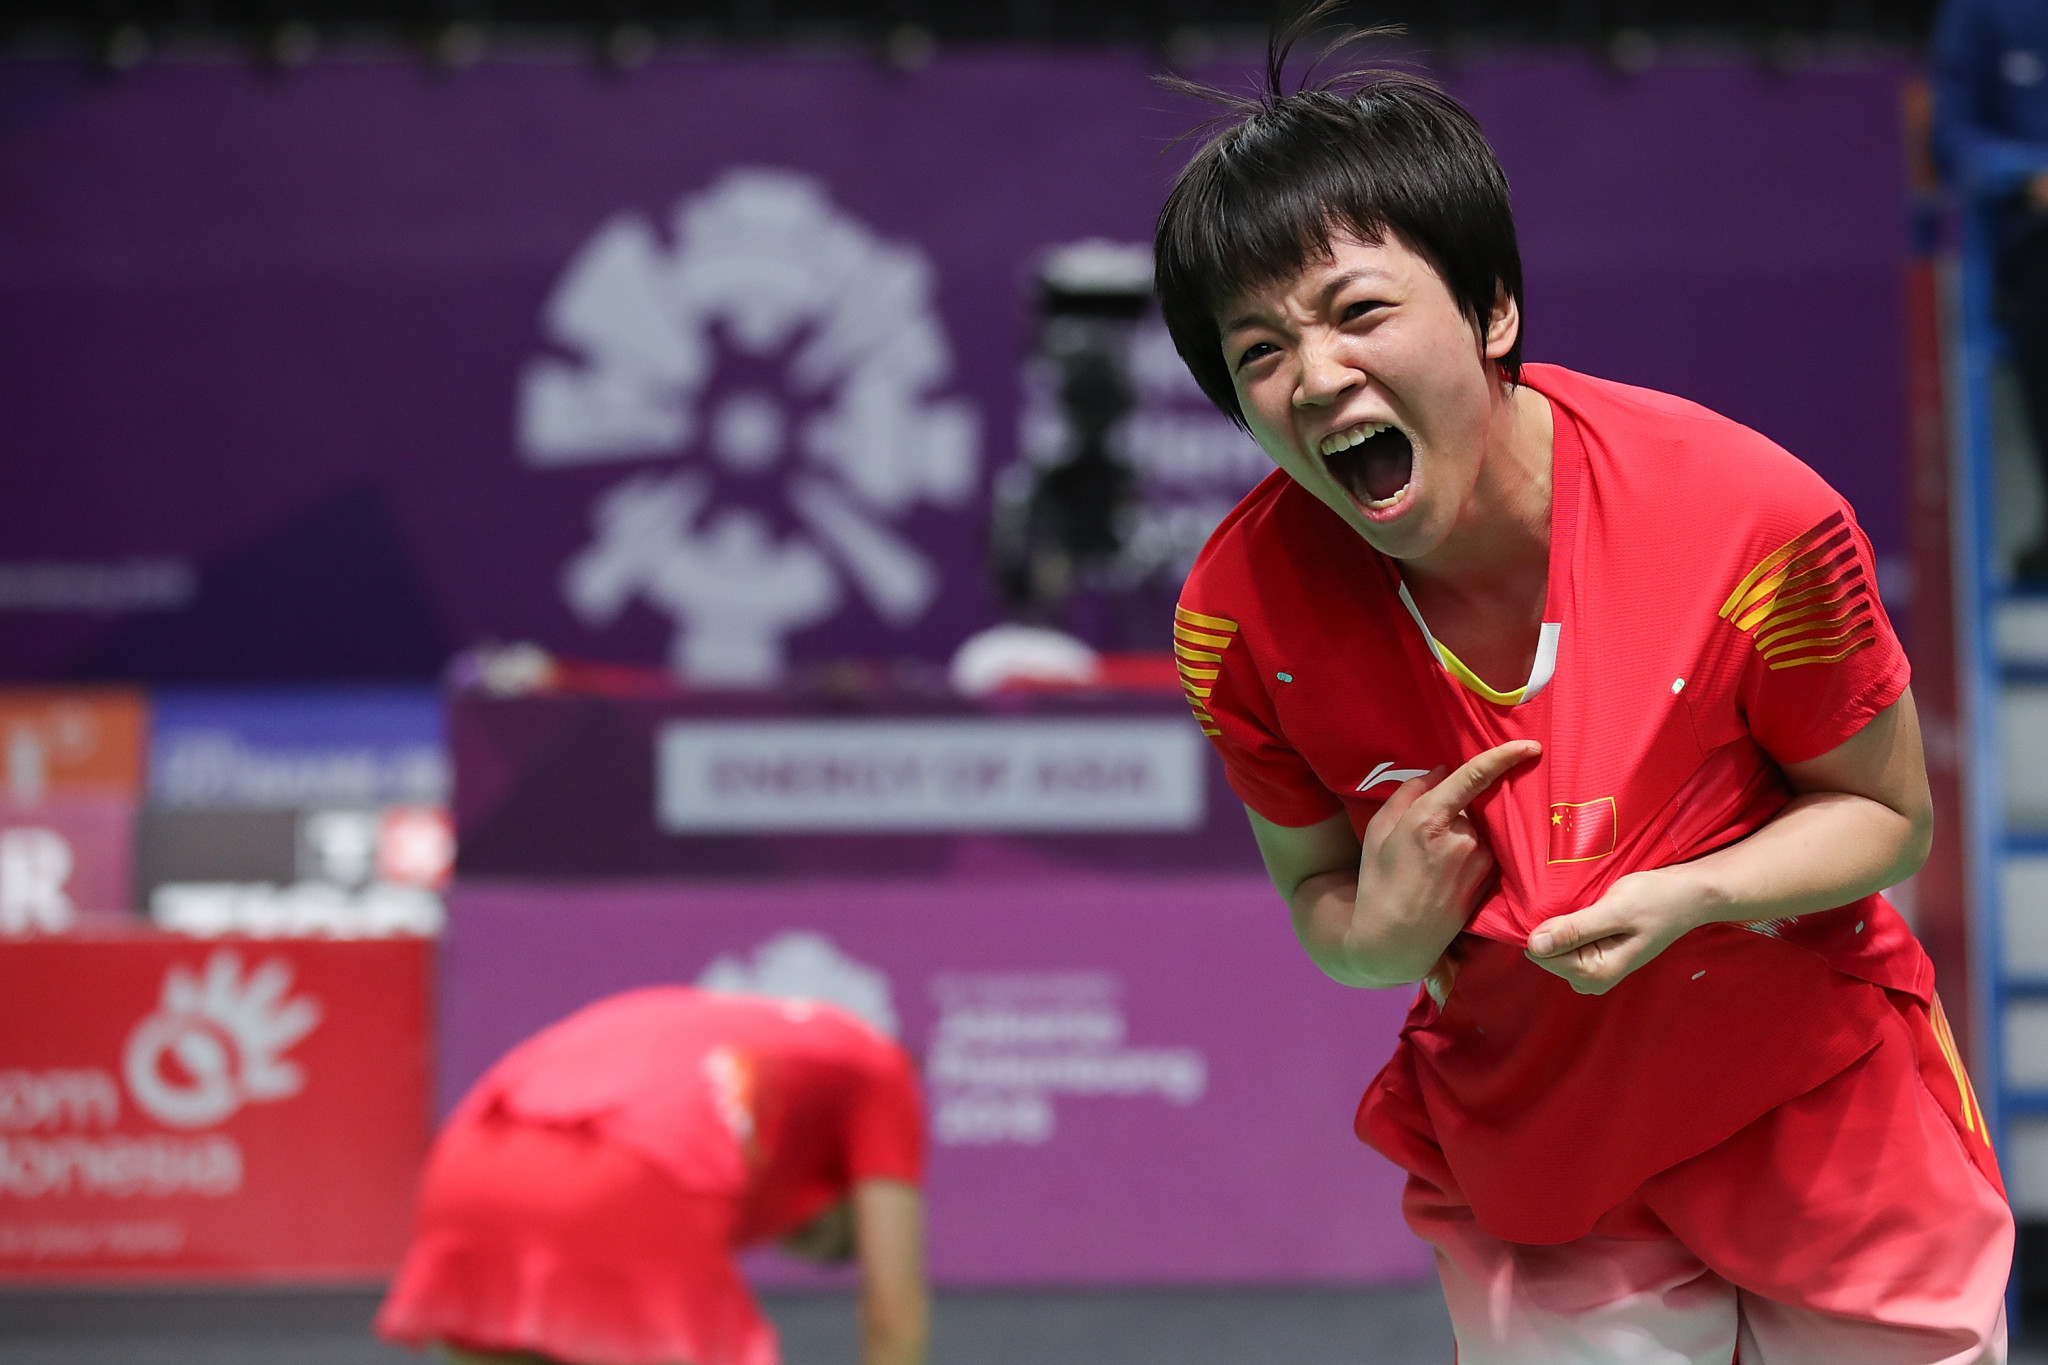 Record seventh win for China in women's badminton doubles at Asian Games